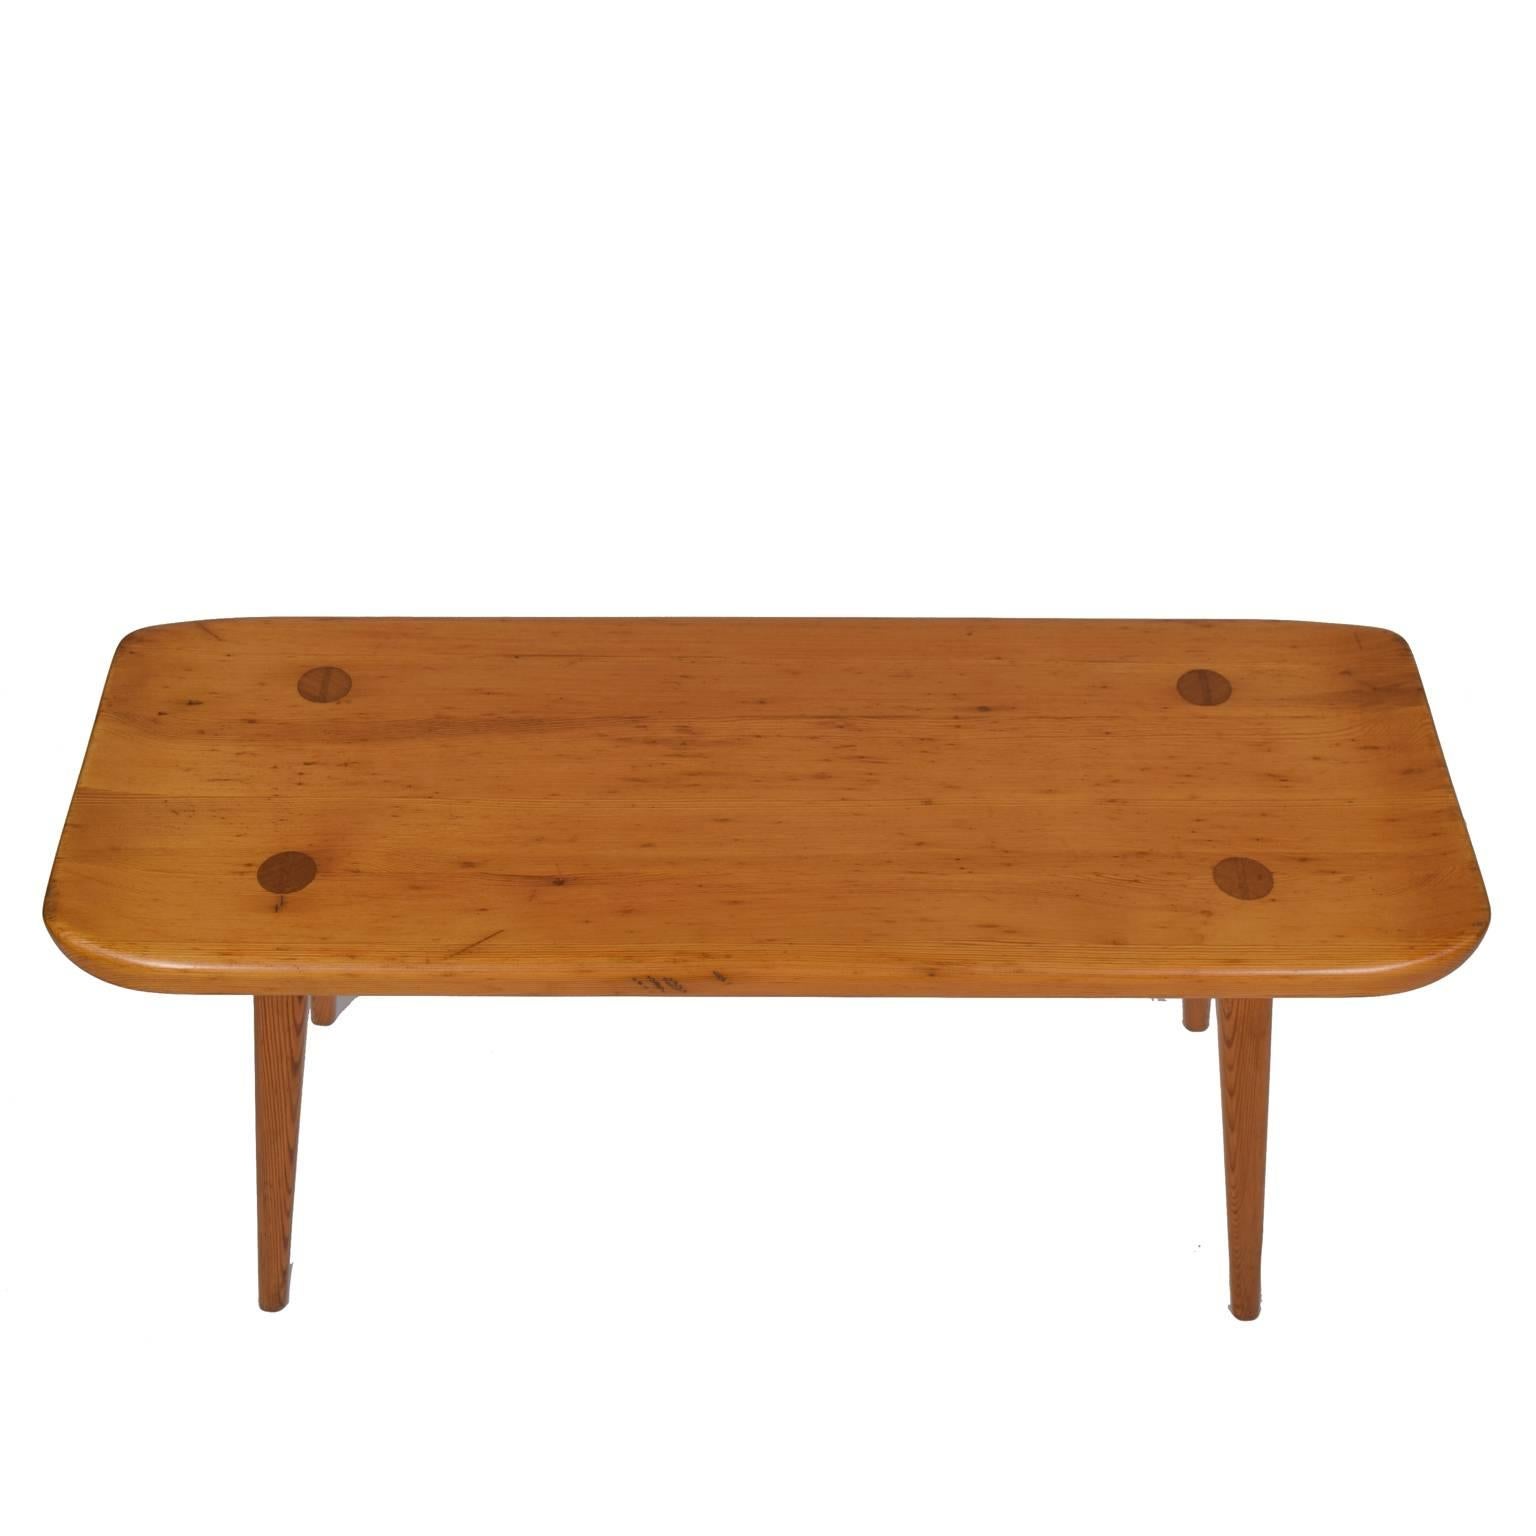 Small bench with curved ends and four legs. Produced by Svensk Fur in Sweden.